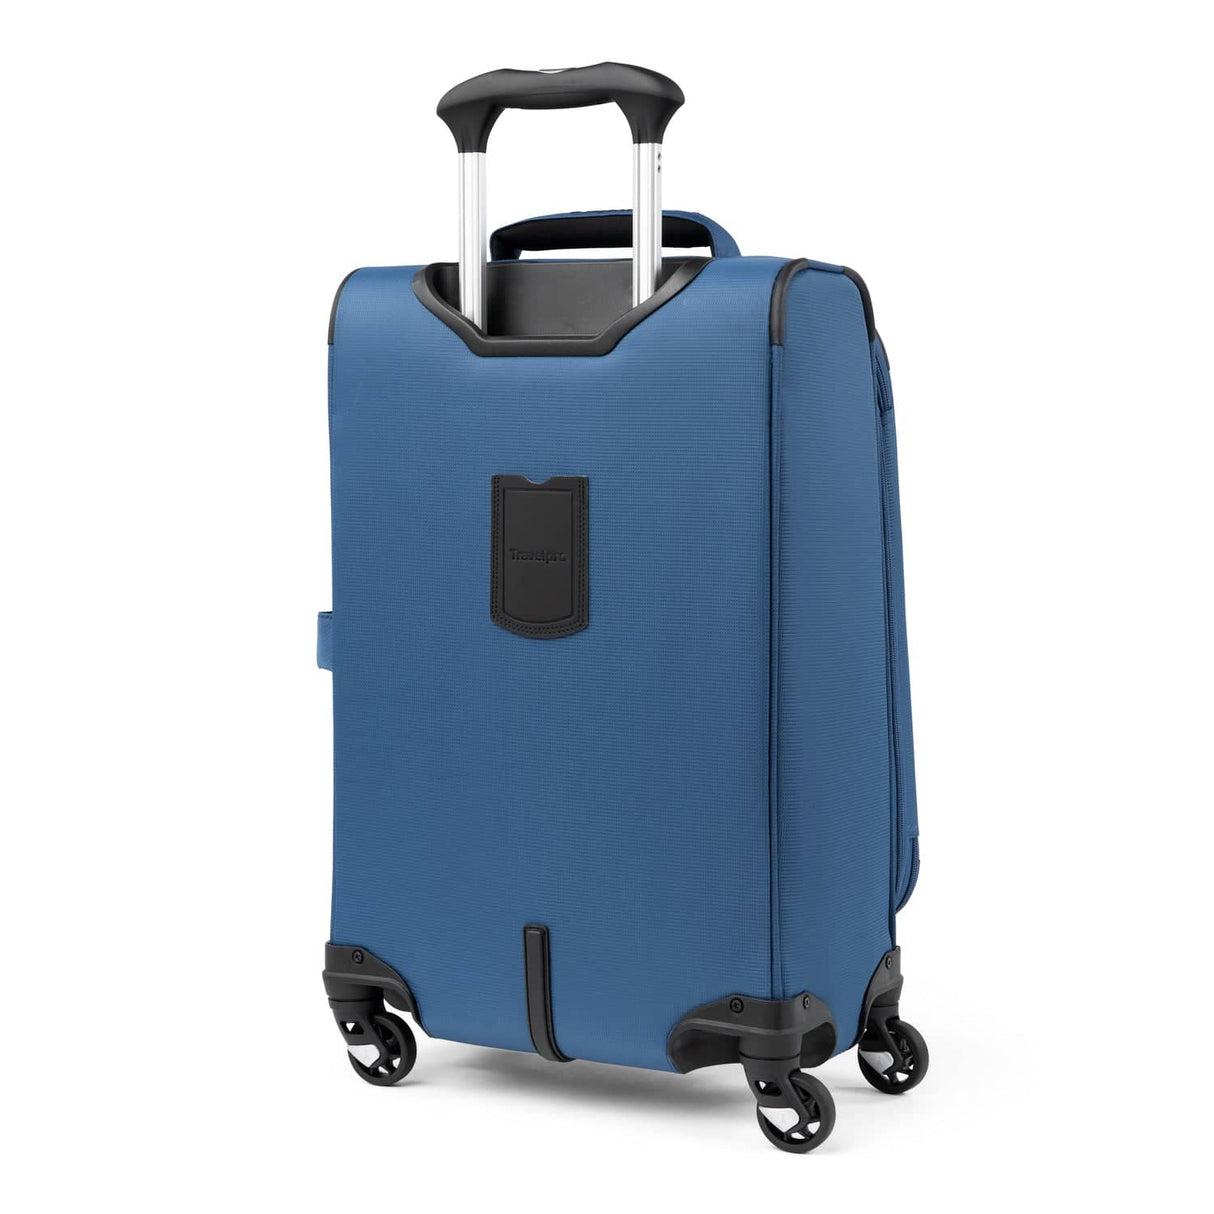 Travelpro Maxlite 5 21" Carry-On Expandable Spinner , , 401176147_back-1500x1500-f3a2c67_1024x1024_2x_1793ce2d-8246-4b84-8f31-05f0f6555b1f